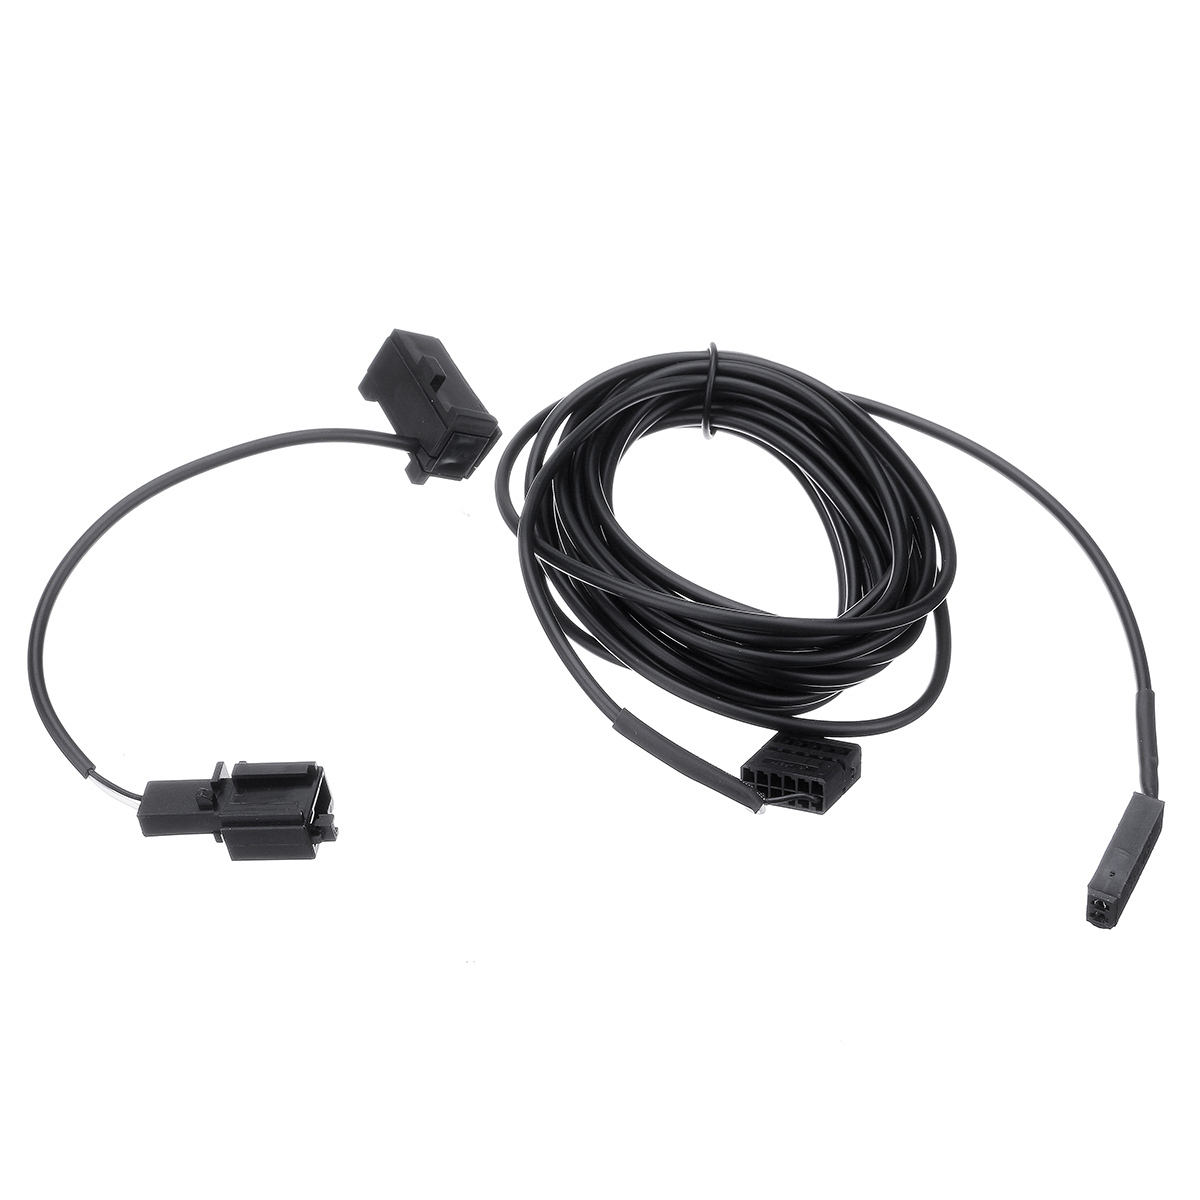 4m-Car-CD-USB-Microphone-bluetooth-Aux-Cable-Auto-Wireless-Audio-Input-Speaker-Adapter-for-BMW-1-3-S-1480556-10